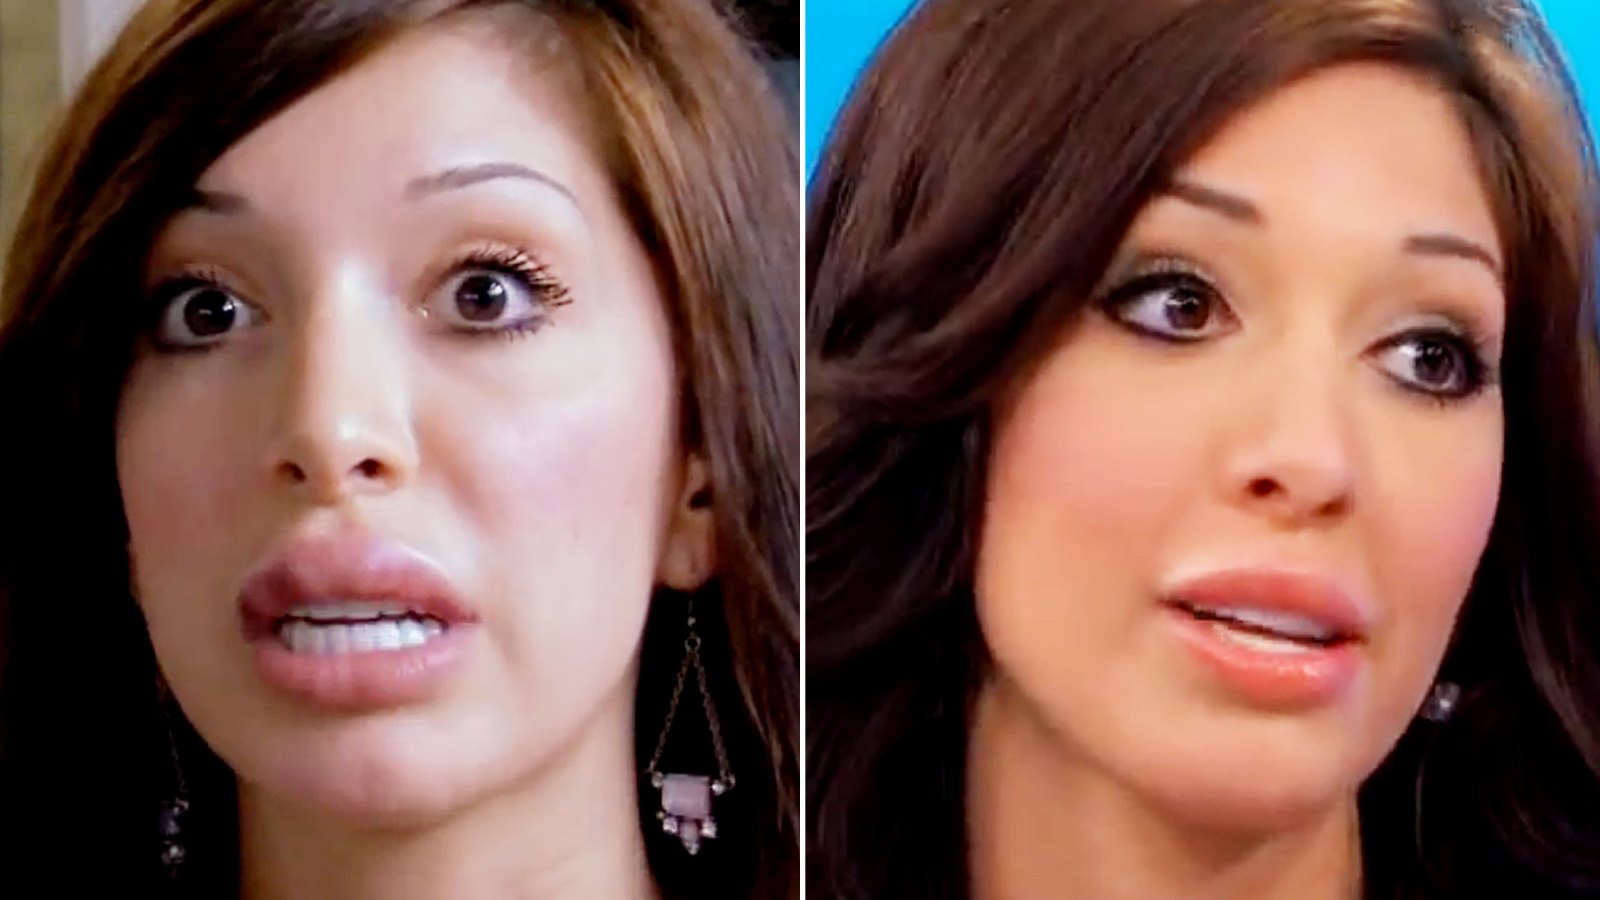 Farrah Abraham with her botched lip procedure and today